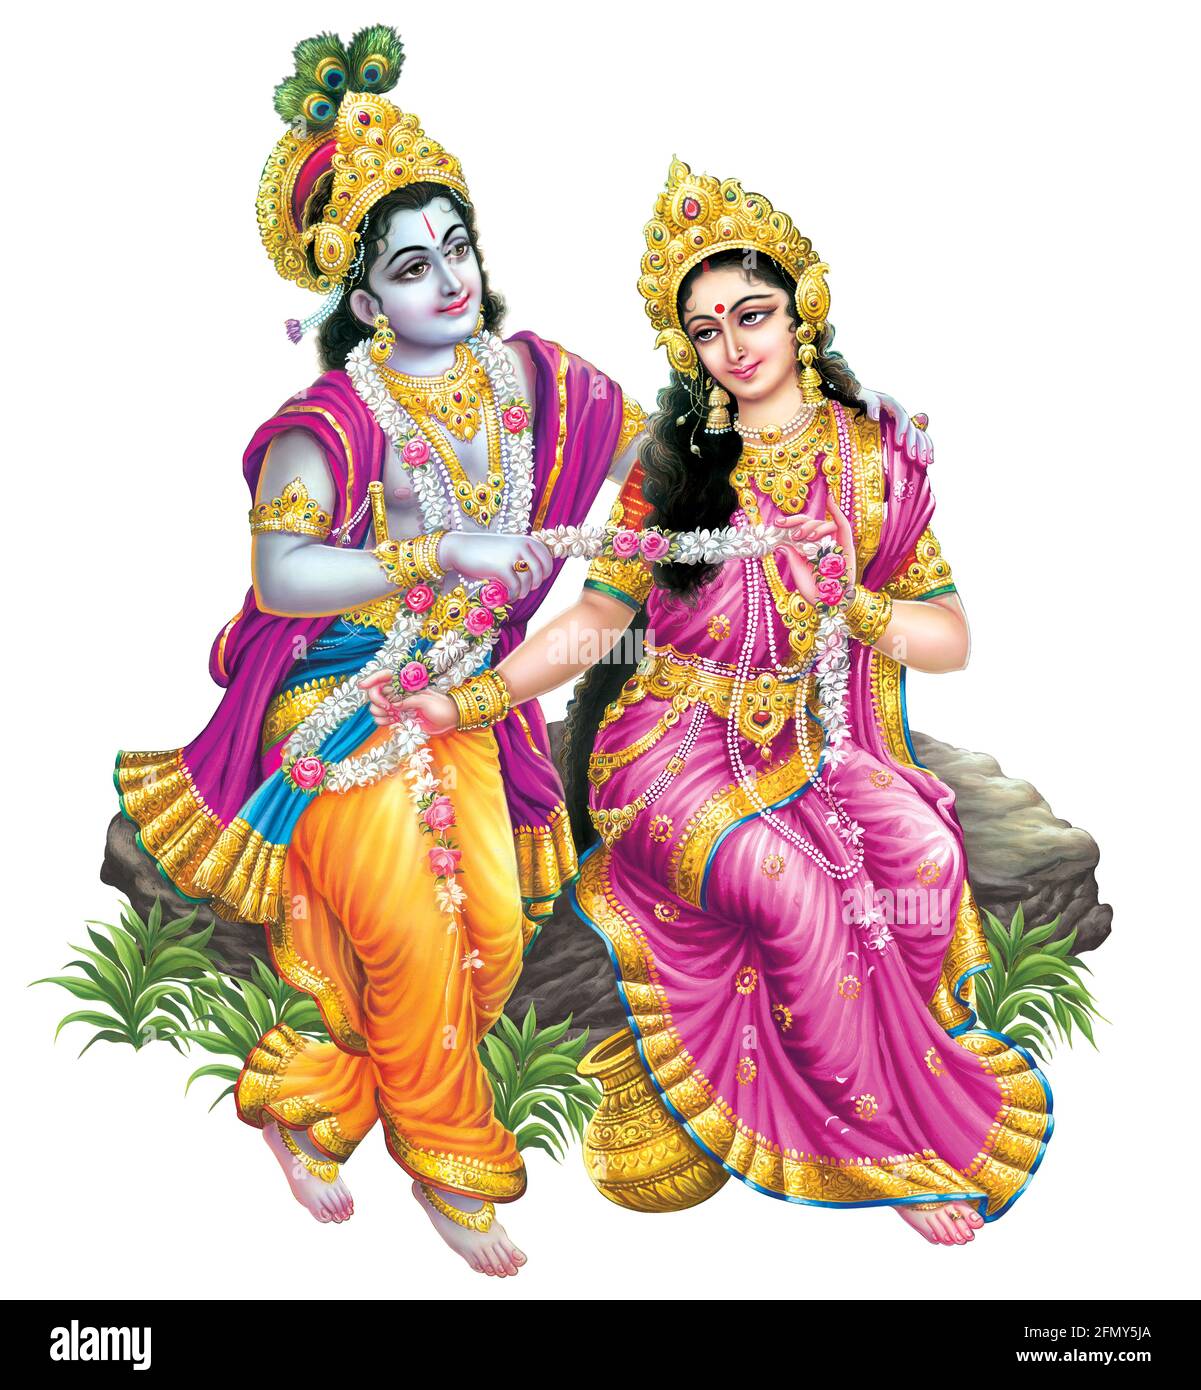 Of lord krishna radha Cut Out Stock Images & Pictures - Alamy